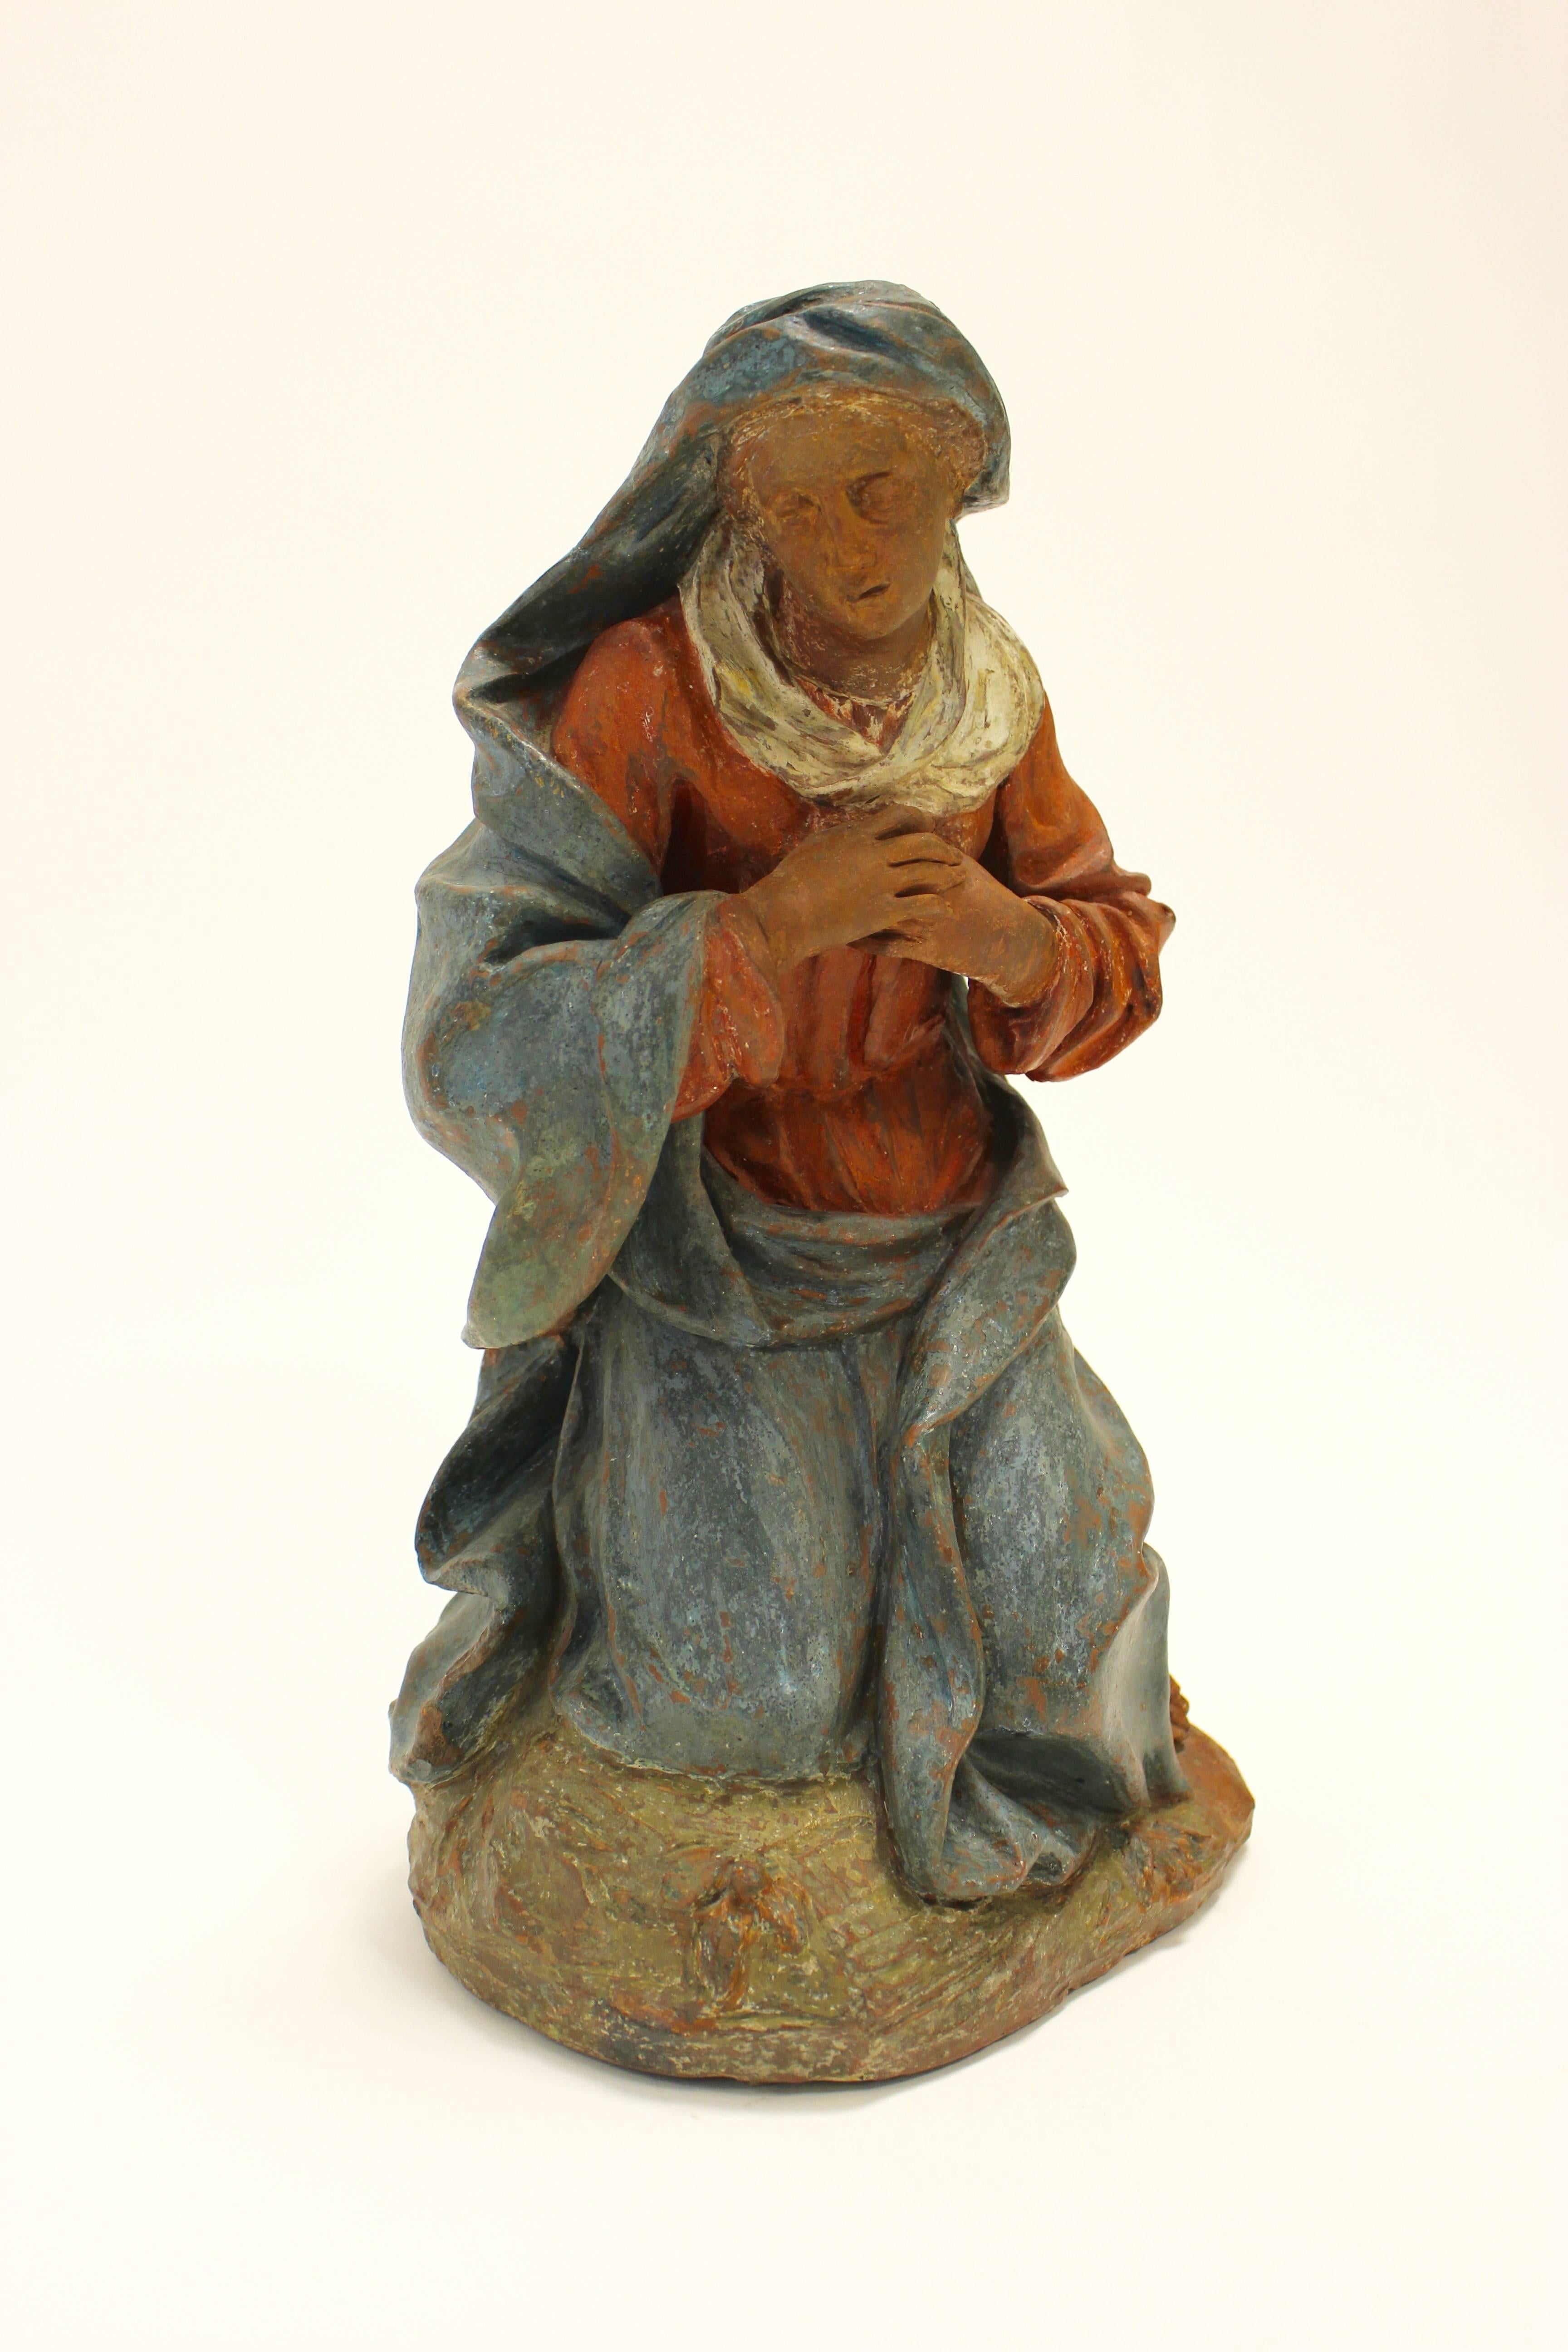 A 17th-18th century continental painted terracotta sculpture of a kneeling Virgin in the manner of Angolo di Poli. This exquisite terracotta sculpture features a poignant depiction of the Virgin Mary. The red and blue clothes that she is wearing